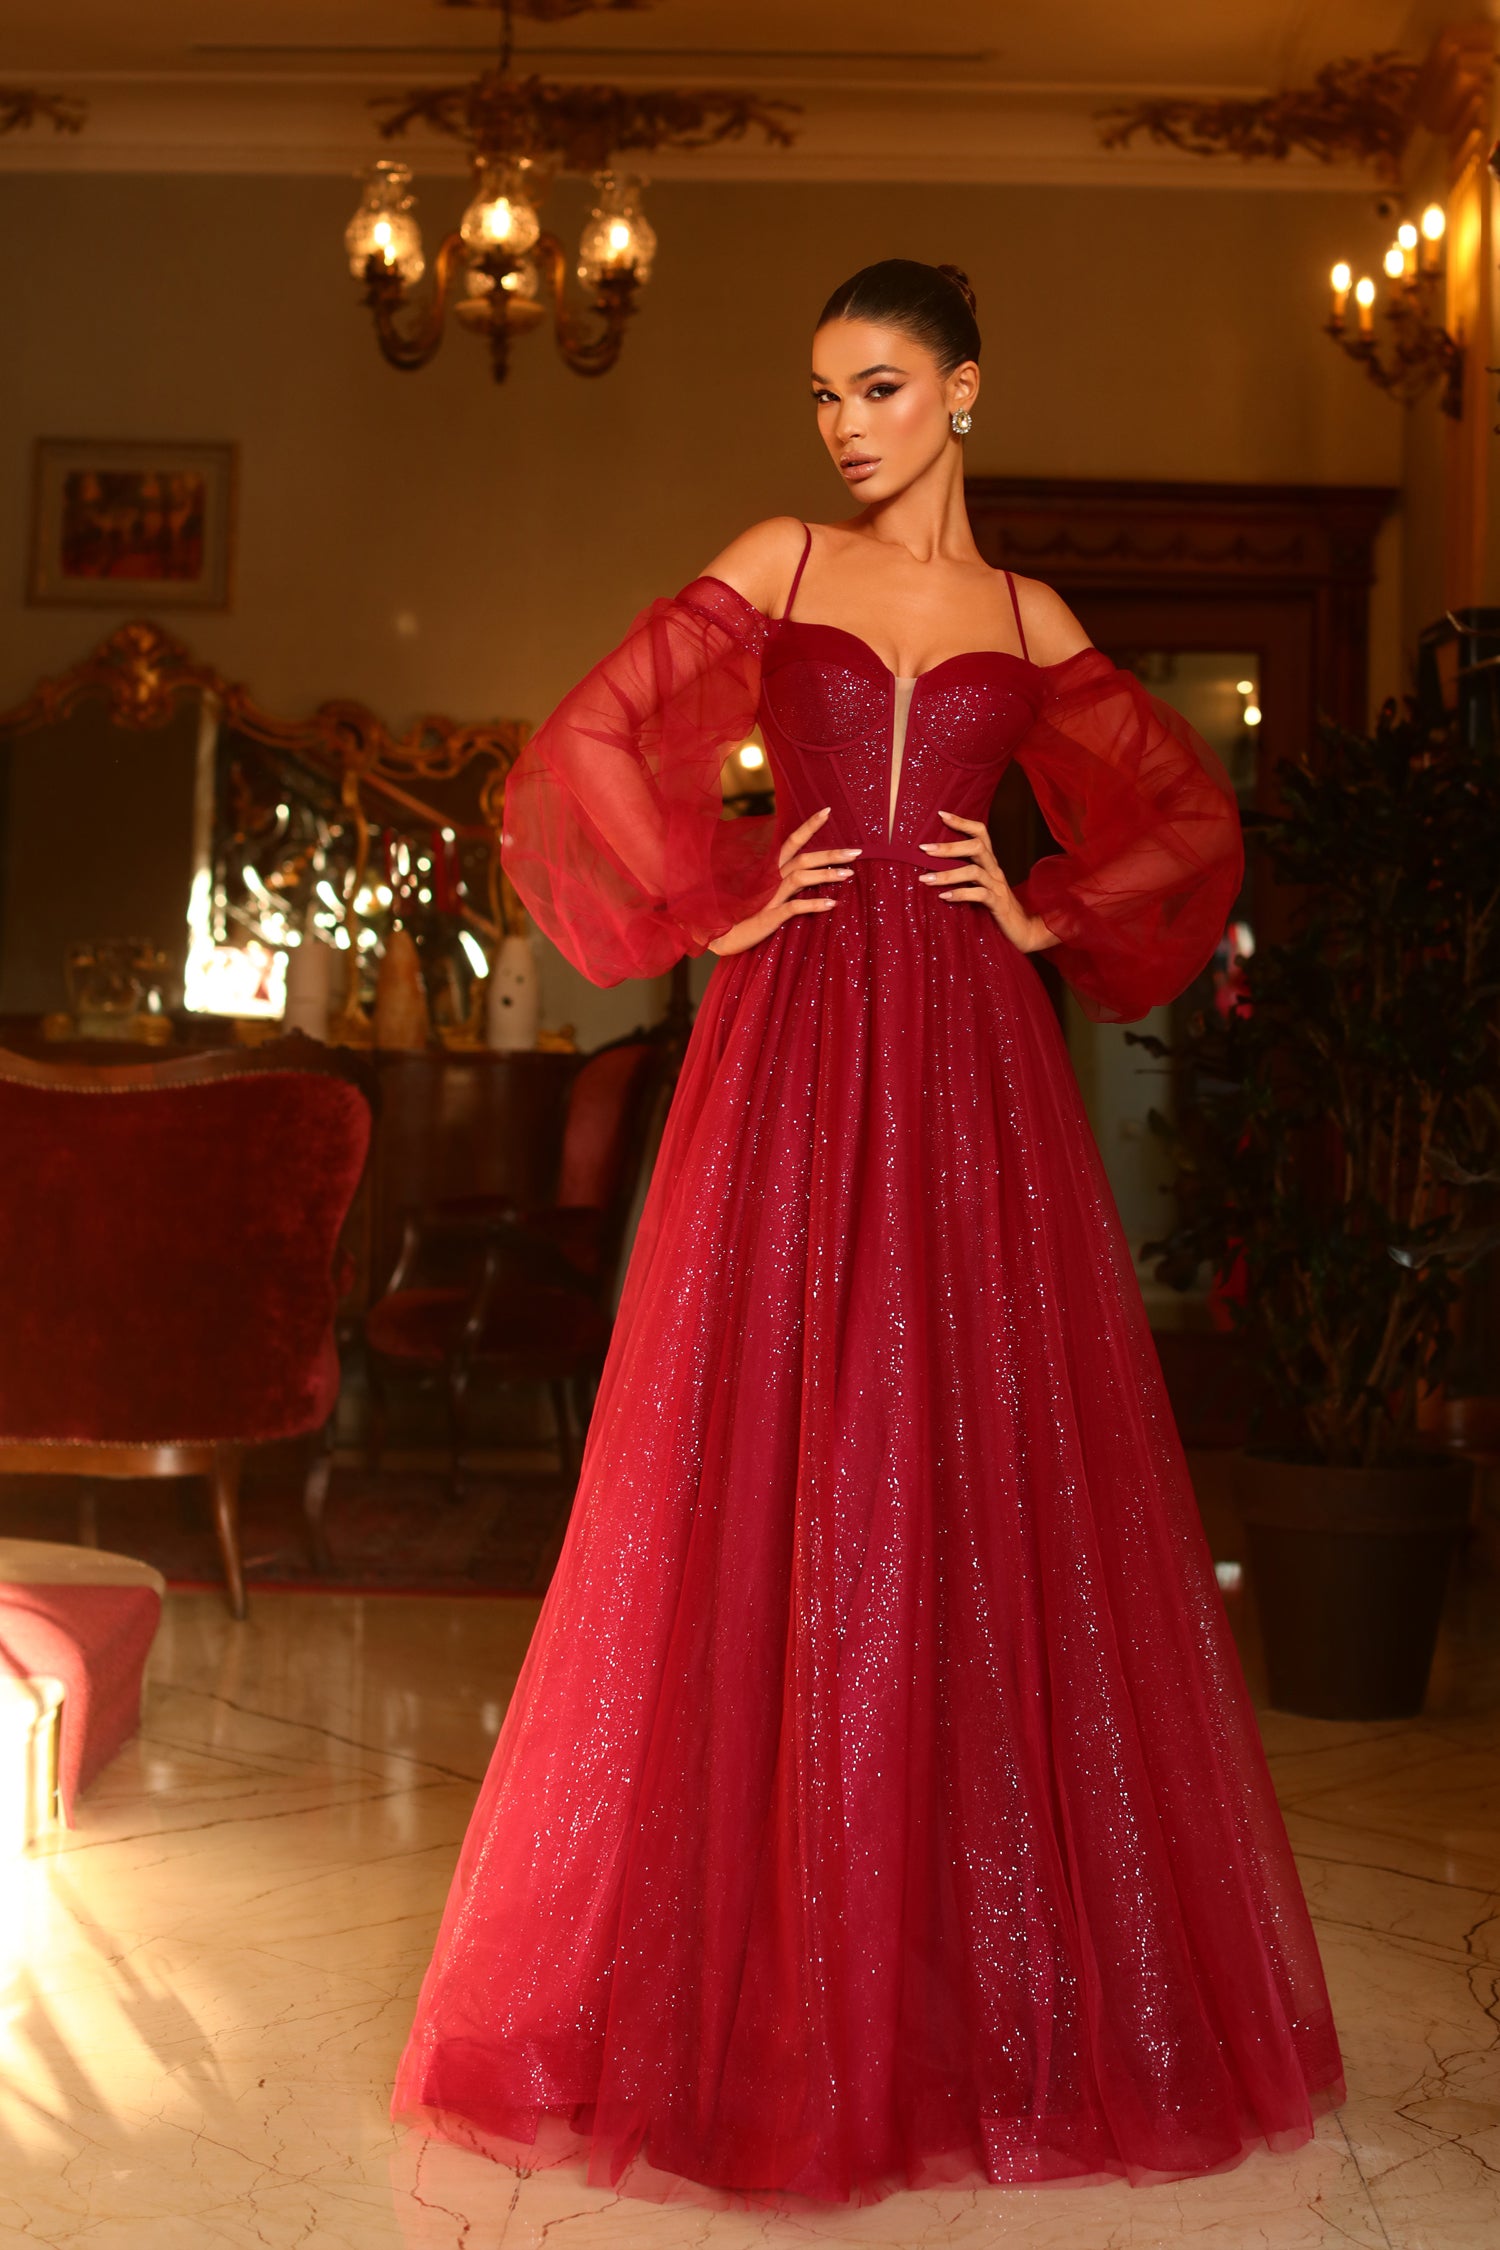 Tina Holly Couture TK130 Ruby Red Long Sleeve Ball Gown Formal Dress